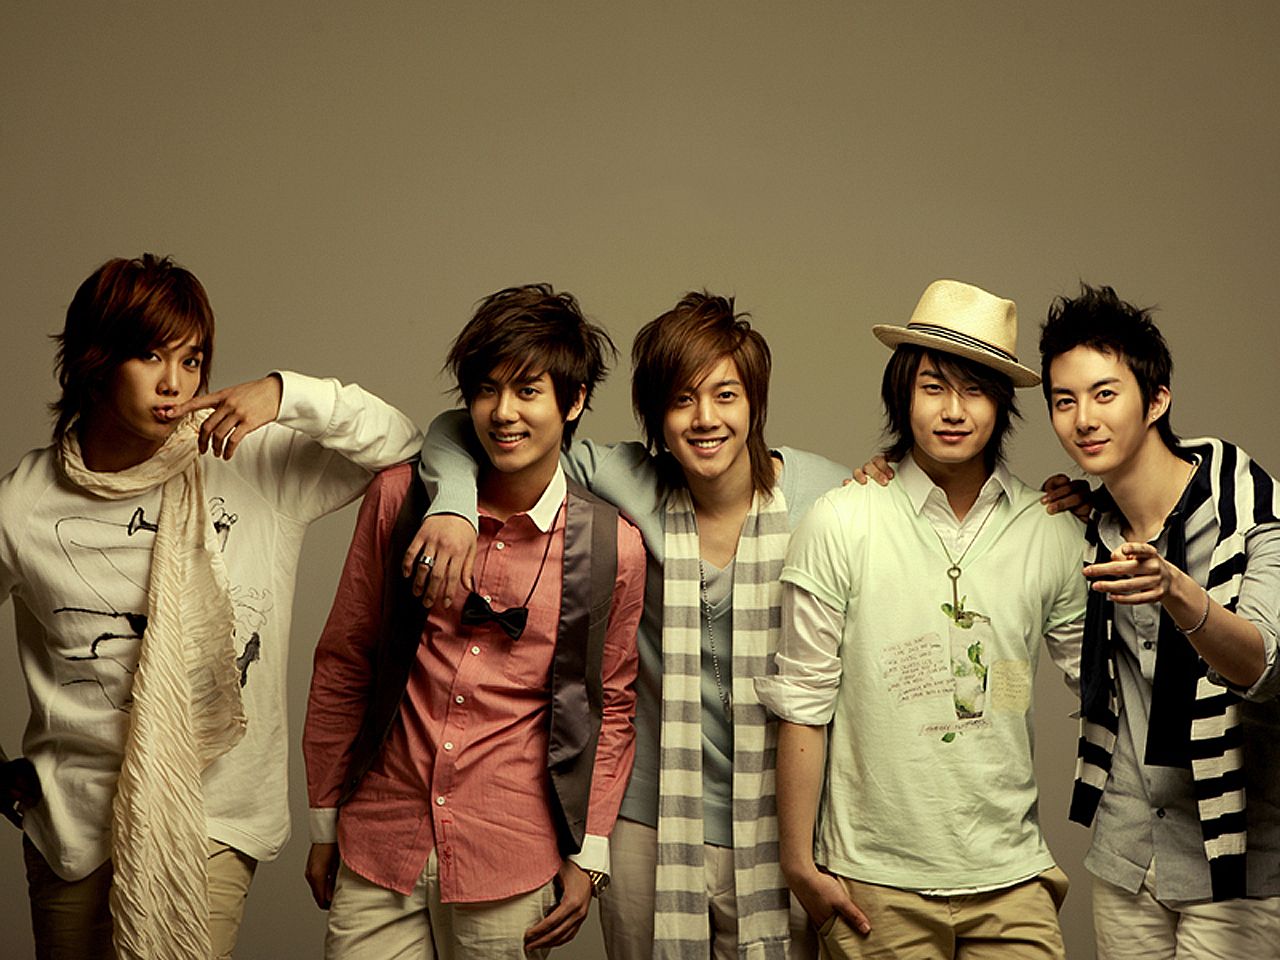 Dont Miss Ss501 New HD Wallpaper Get All Of